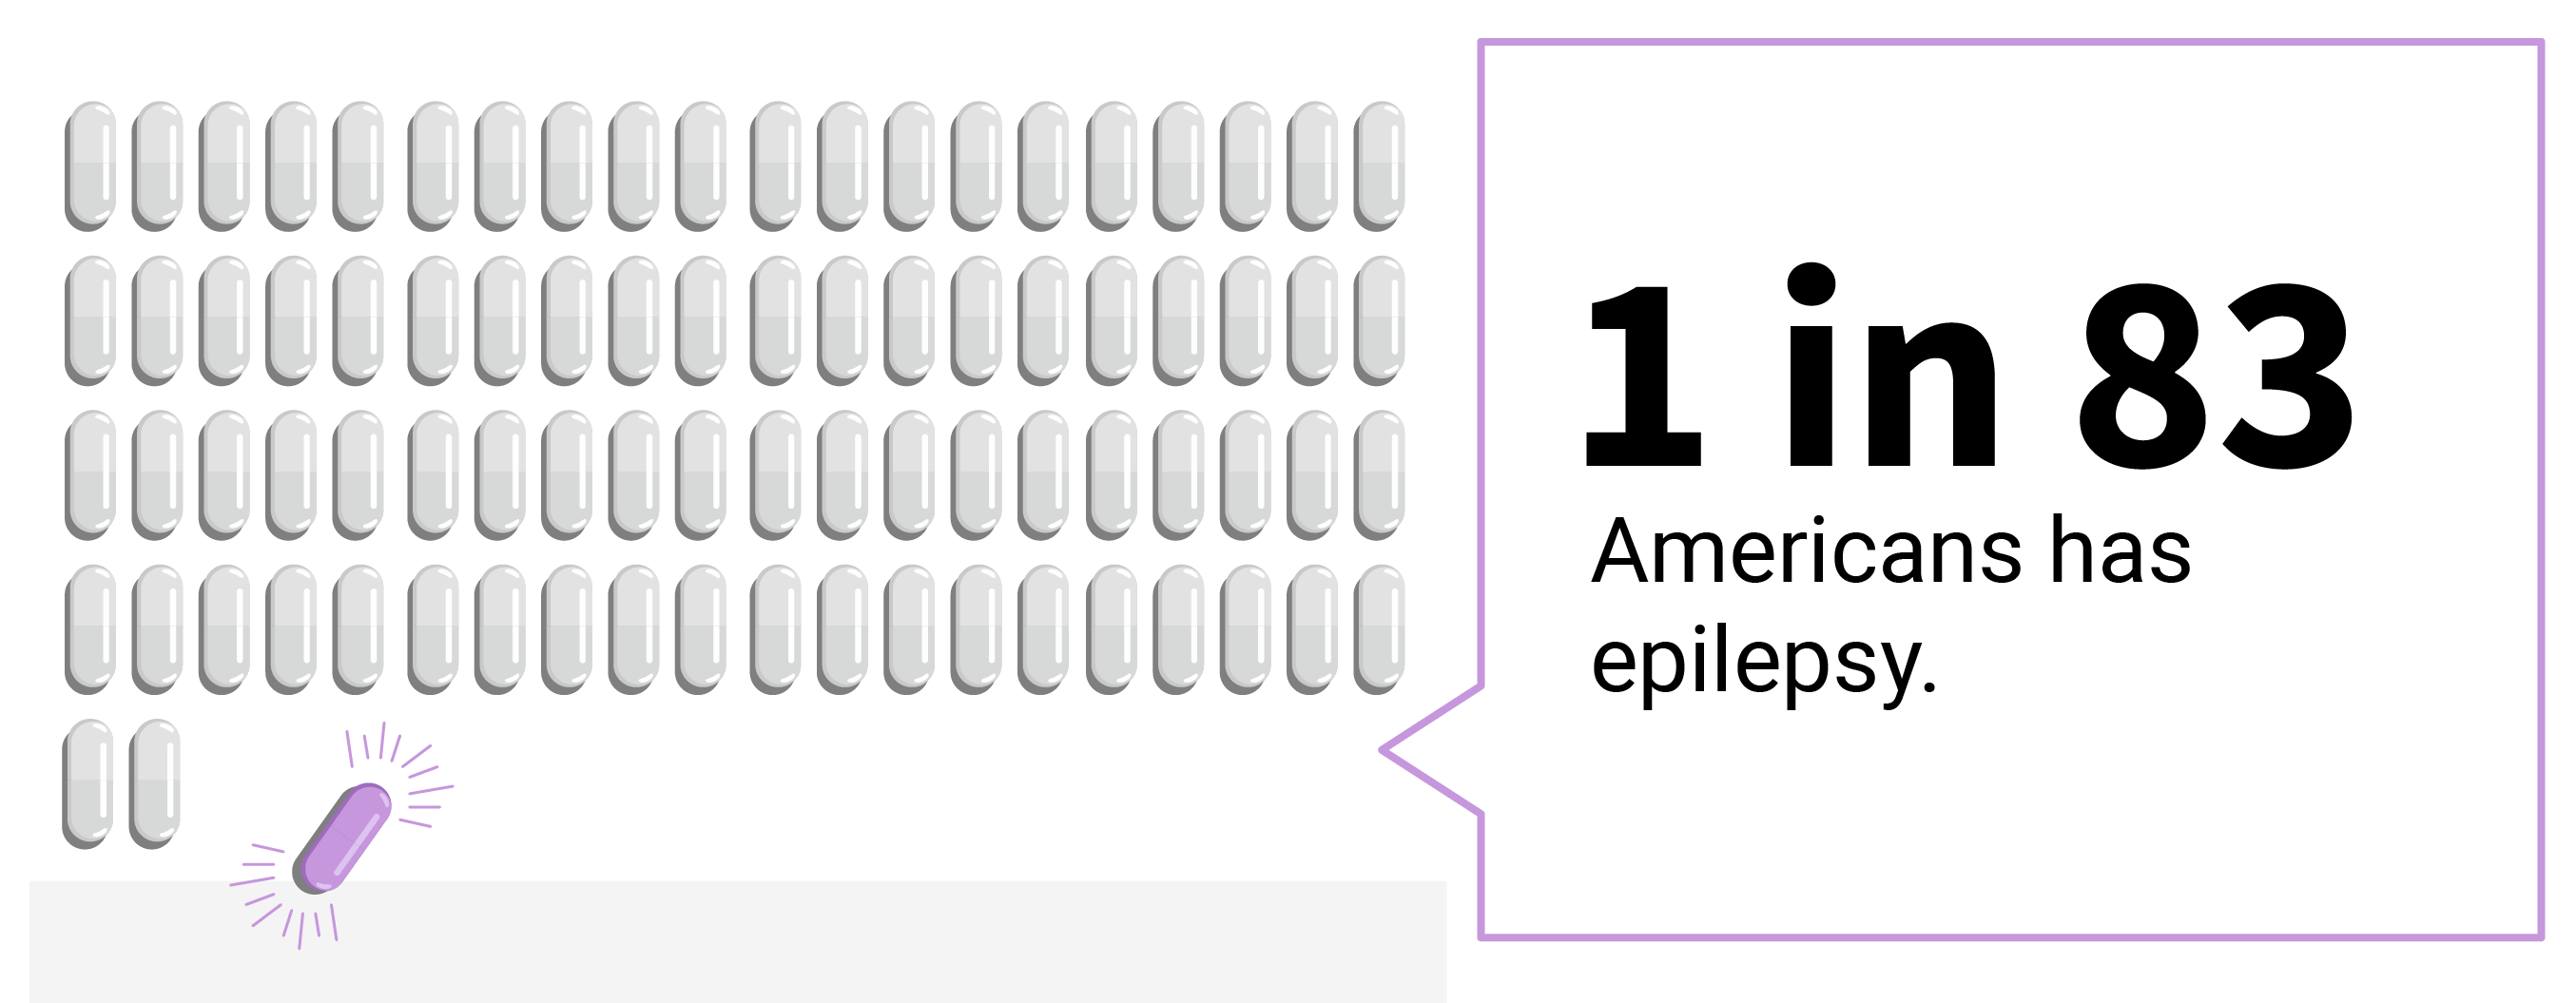 Call out text box saying 1 in 83 Americans has epilepsy. 